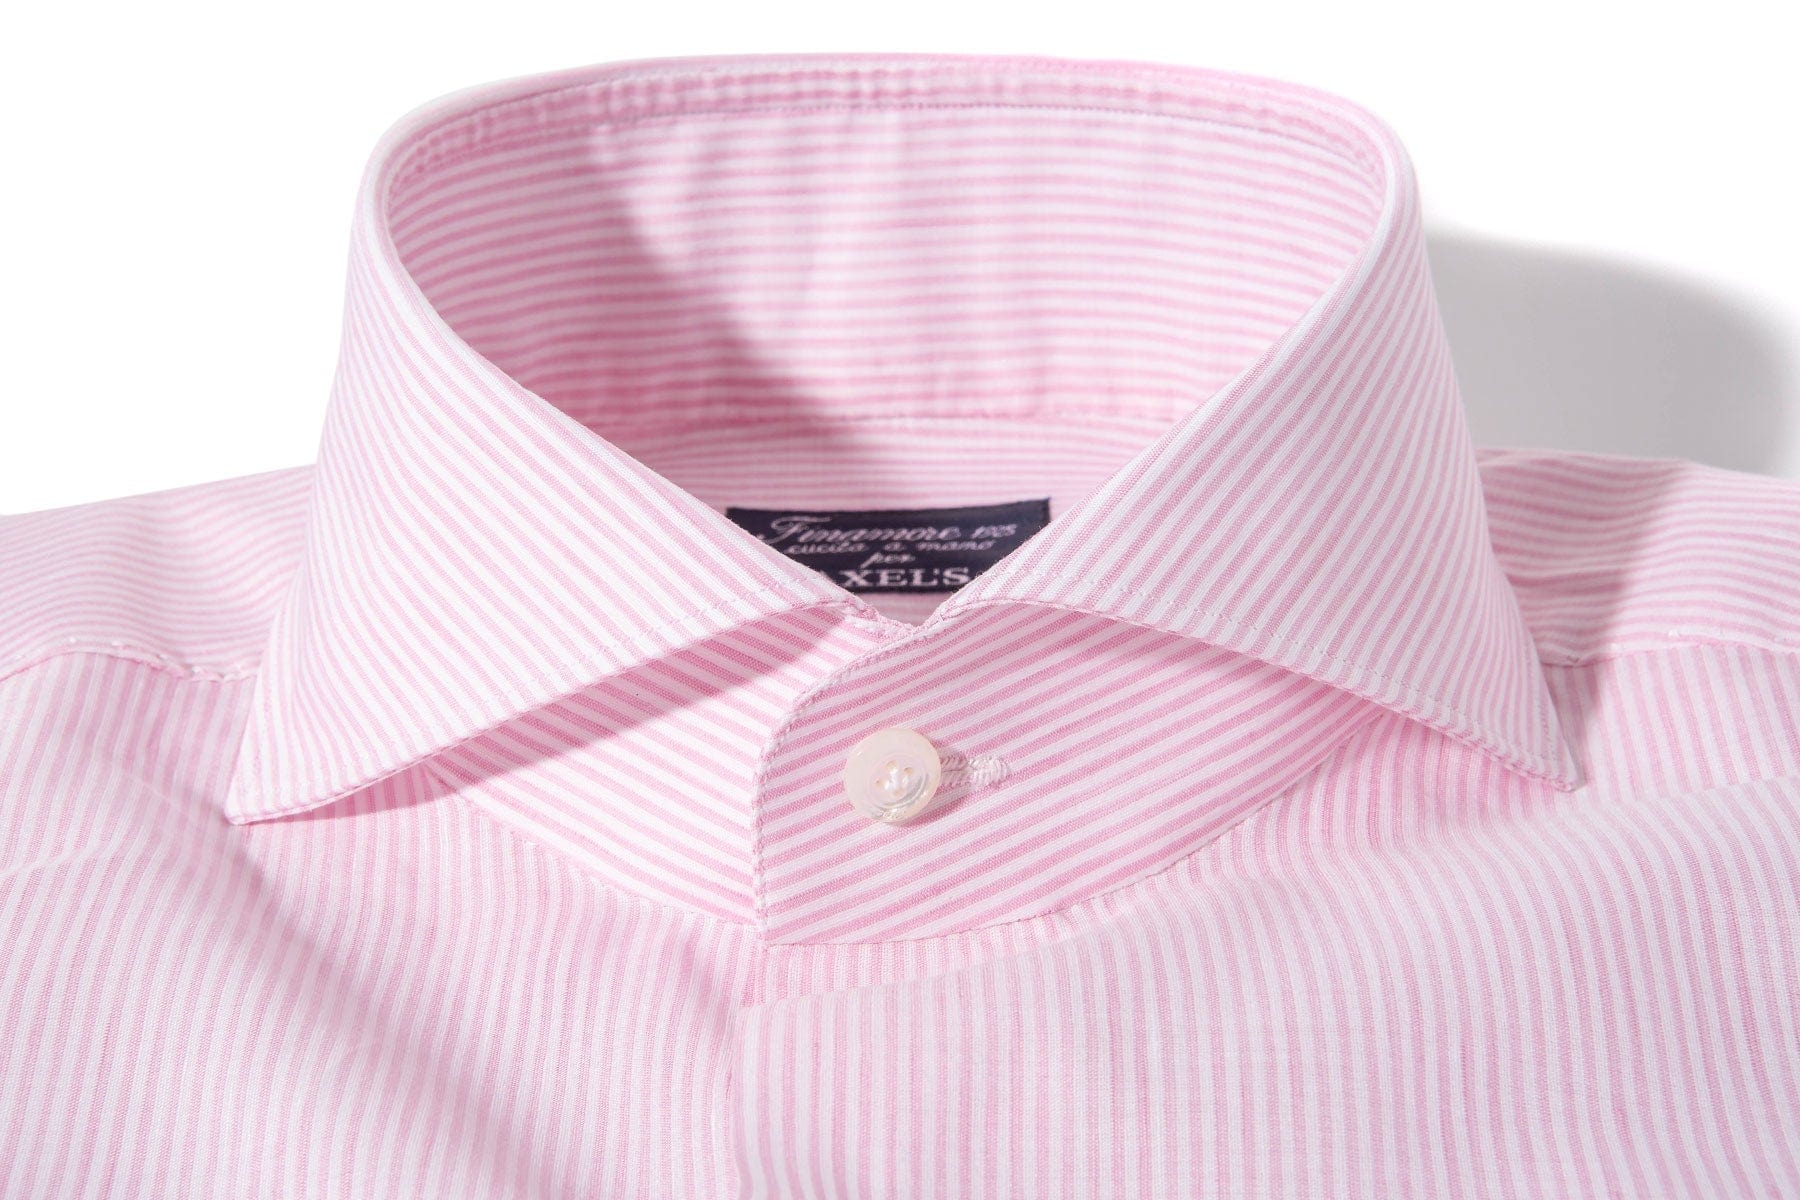 Lutung Cotton Linen Stripe In Pink - AXEL'S